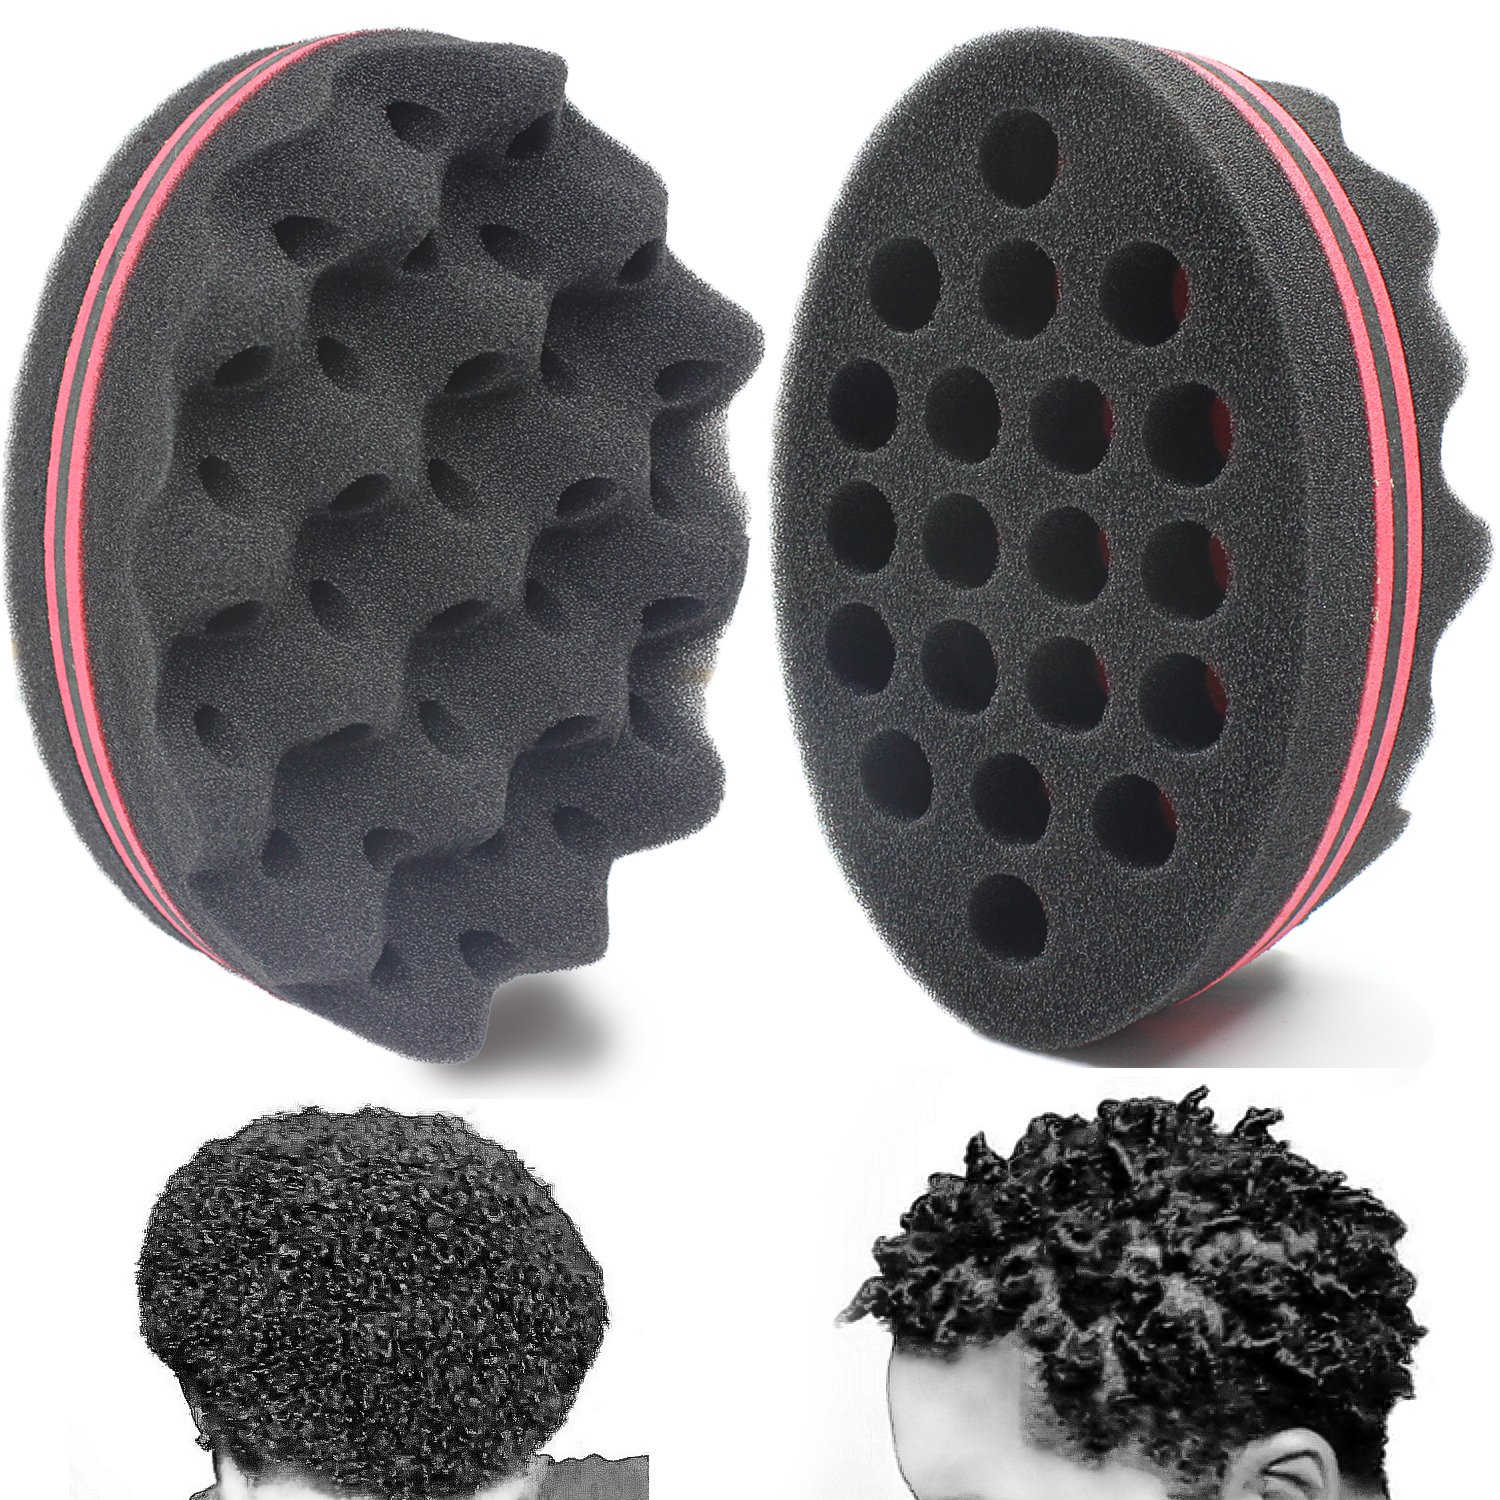 What are the holes in the hair sponge for?